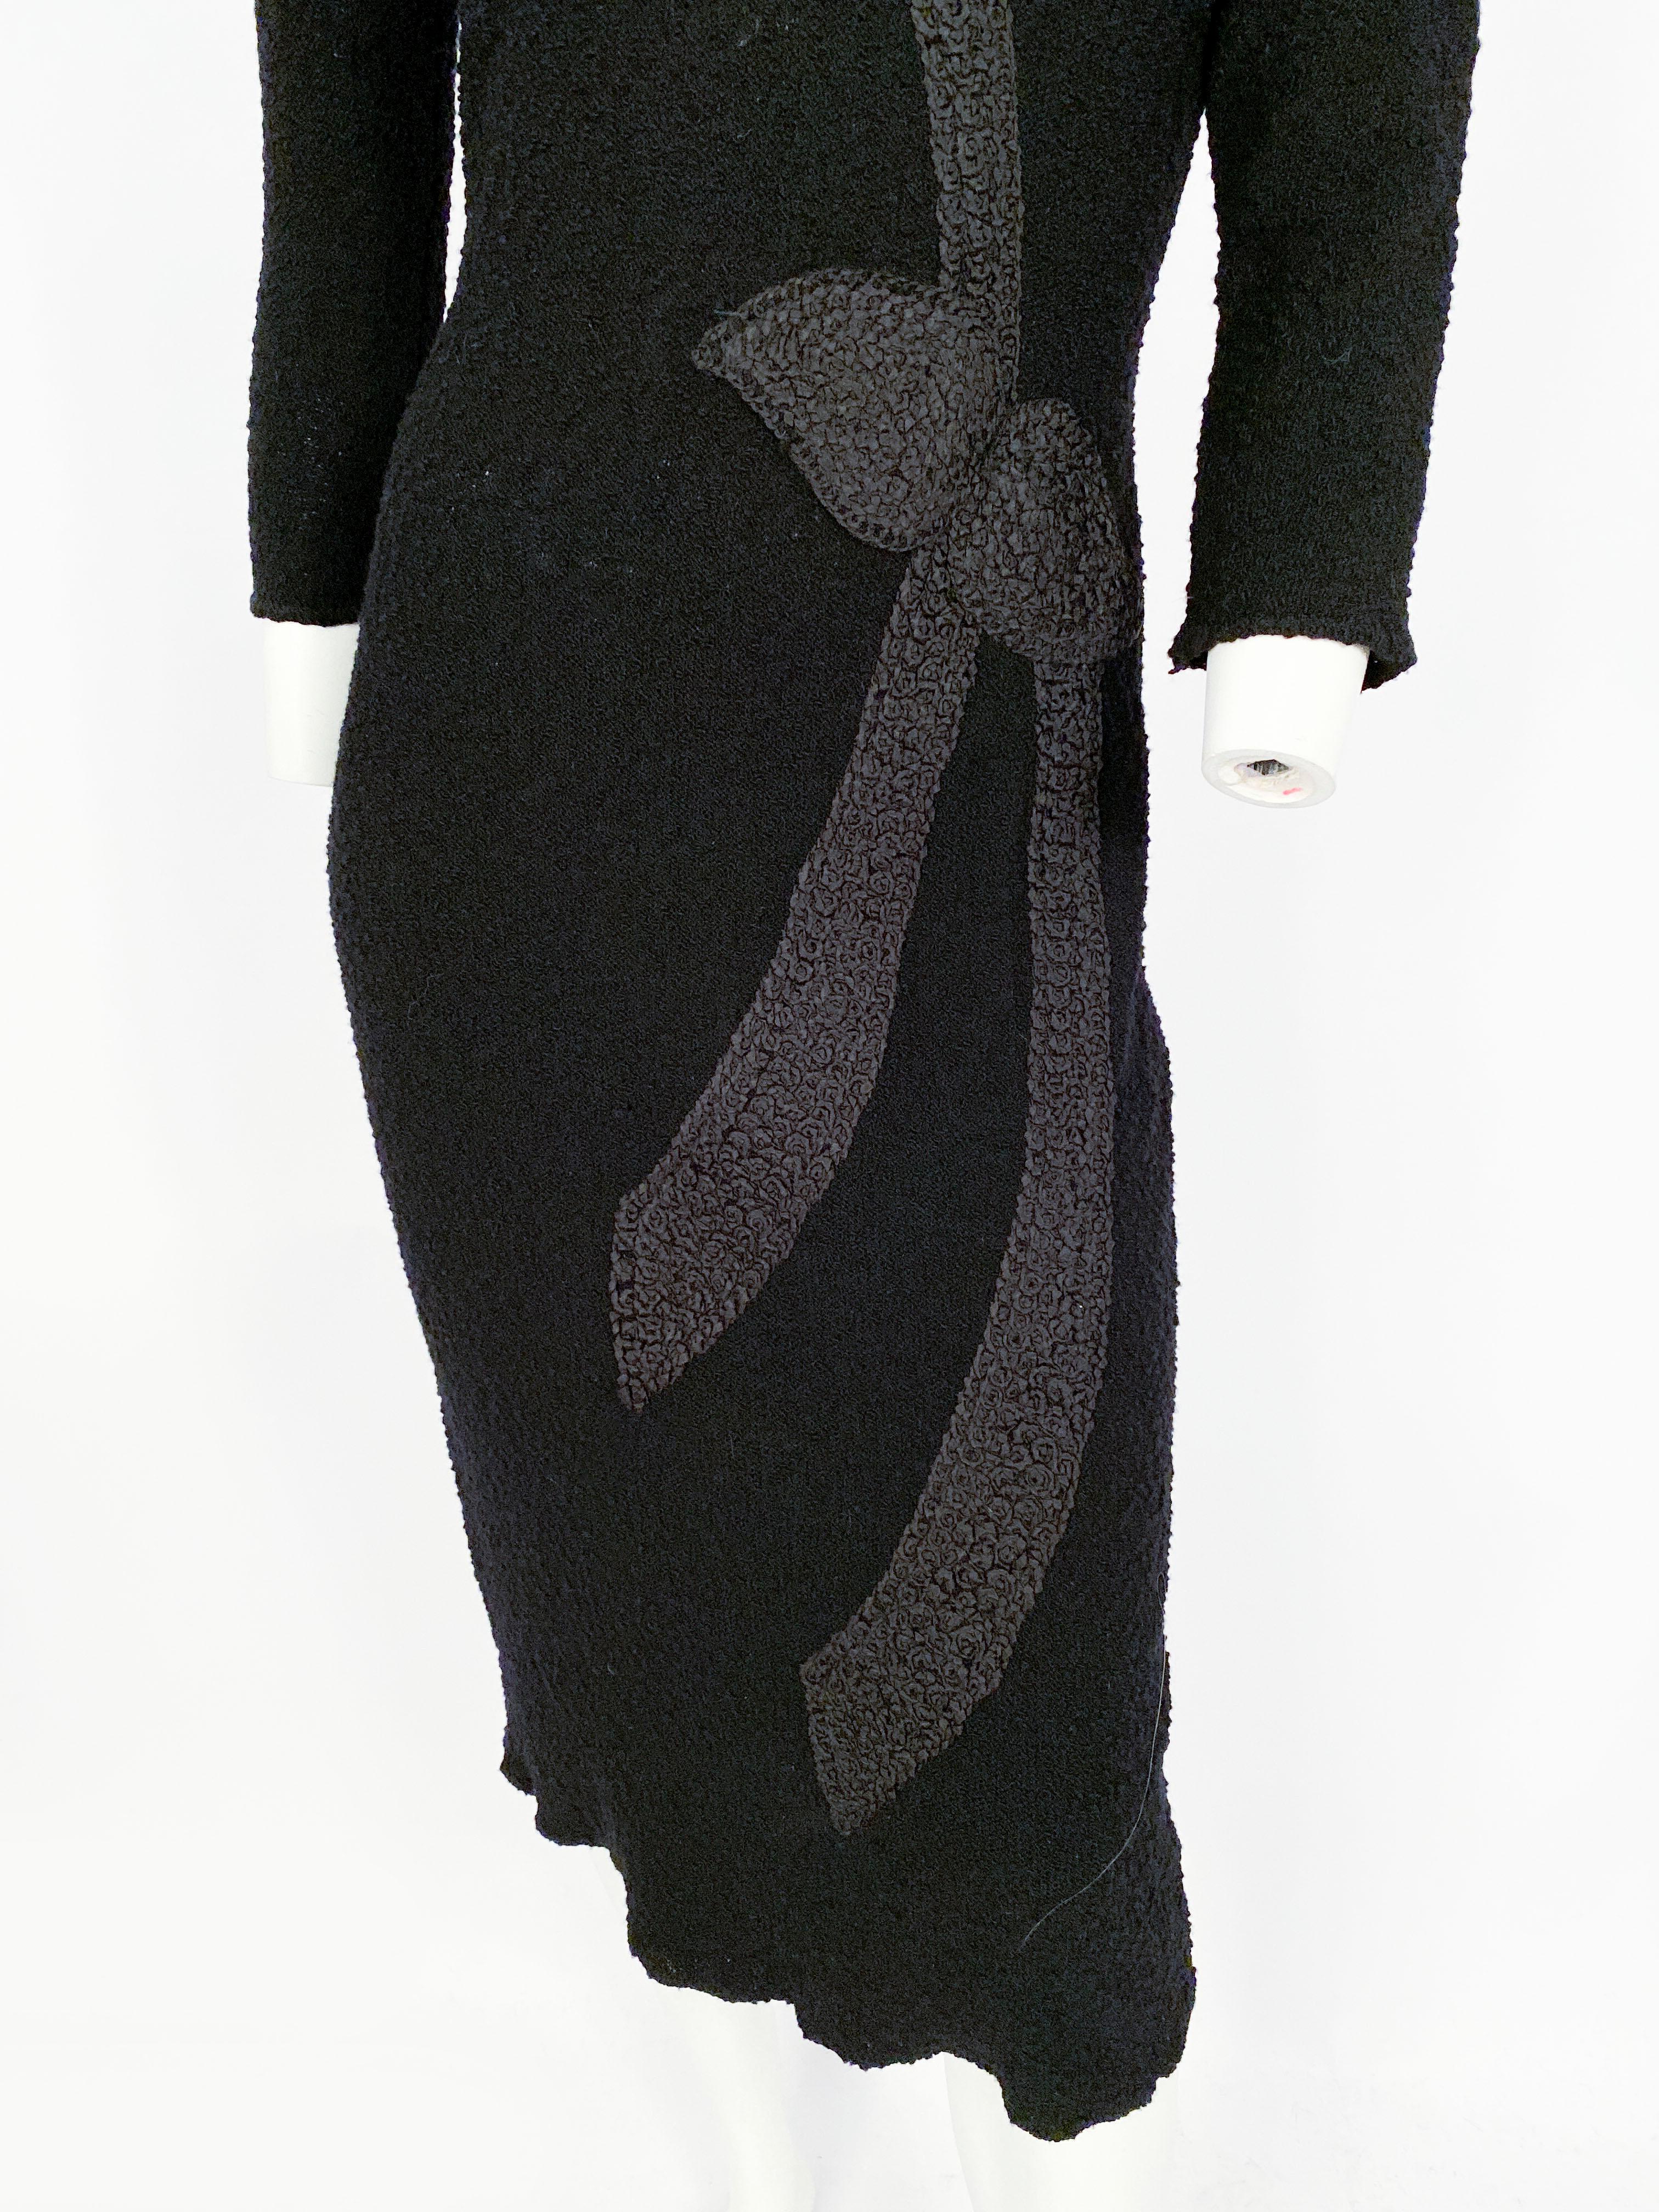 1950s black knit dress with 3/4-length sleeves, modified raglin shape, asymmetrical ribbon work that is finished to look like a dimensional tied bow to complement the v-neckline. Since this dress is knit, it has a considerable amount of stretch. 